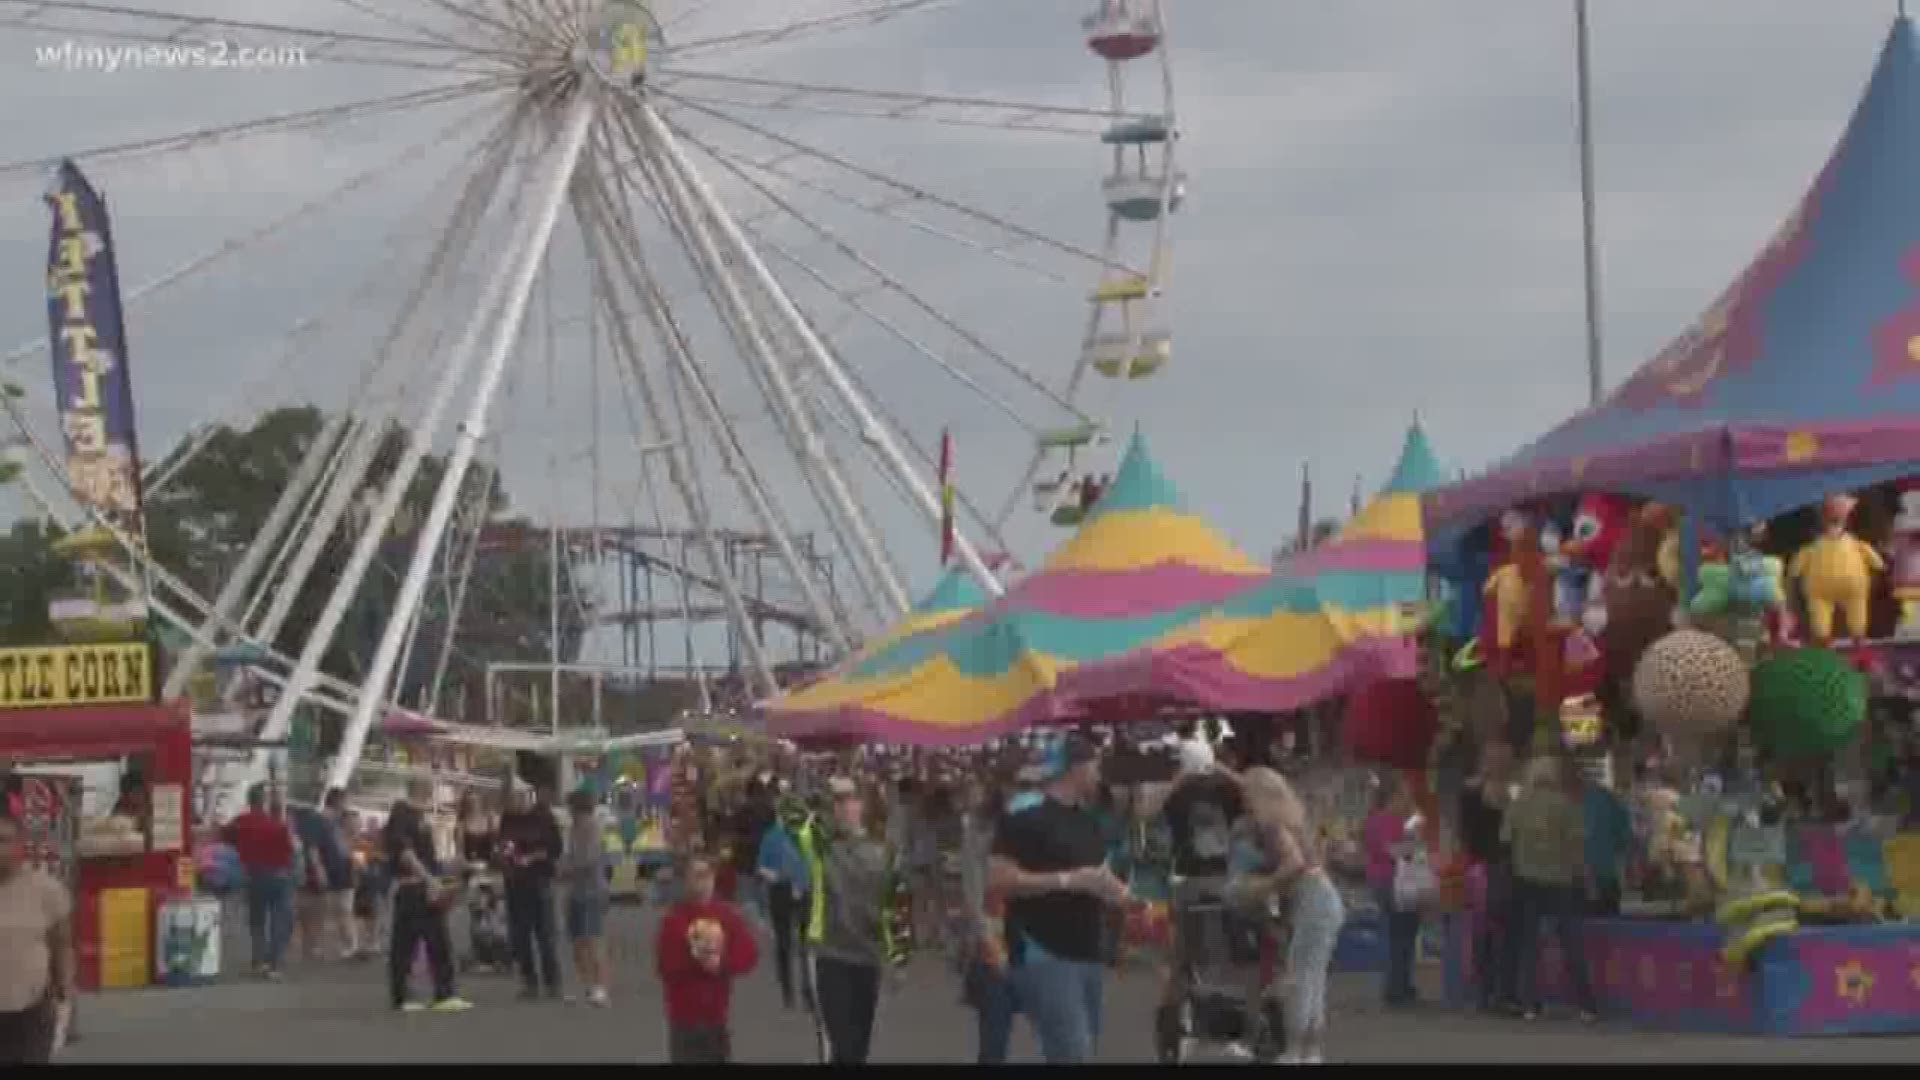 The fair planning committee says the name change is a go, but ultimately, the green or red light is going to come from next Monday's City Council meeting.